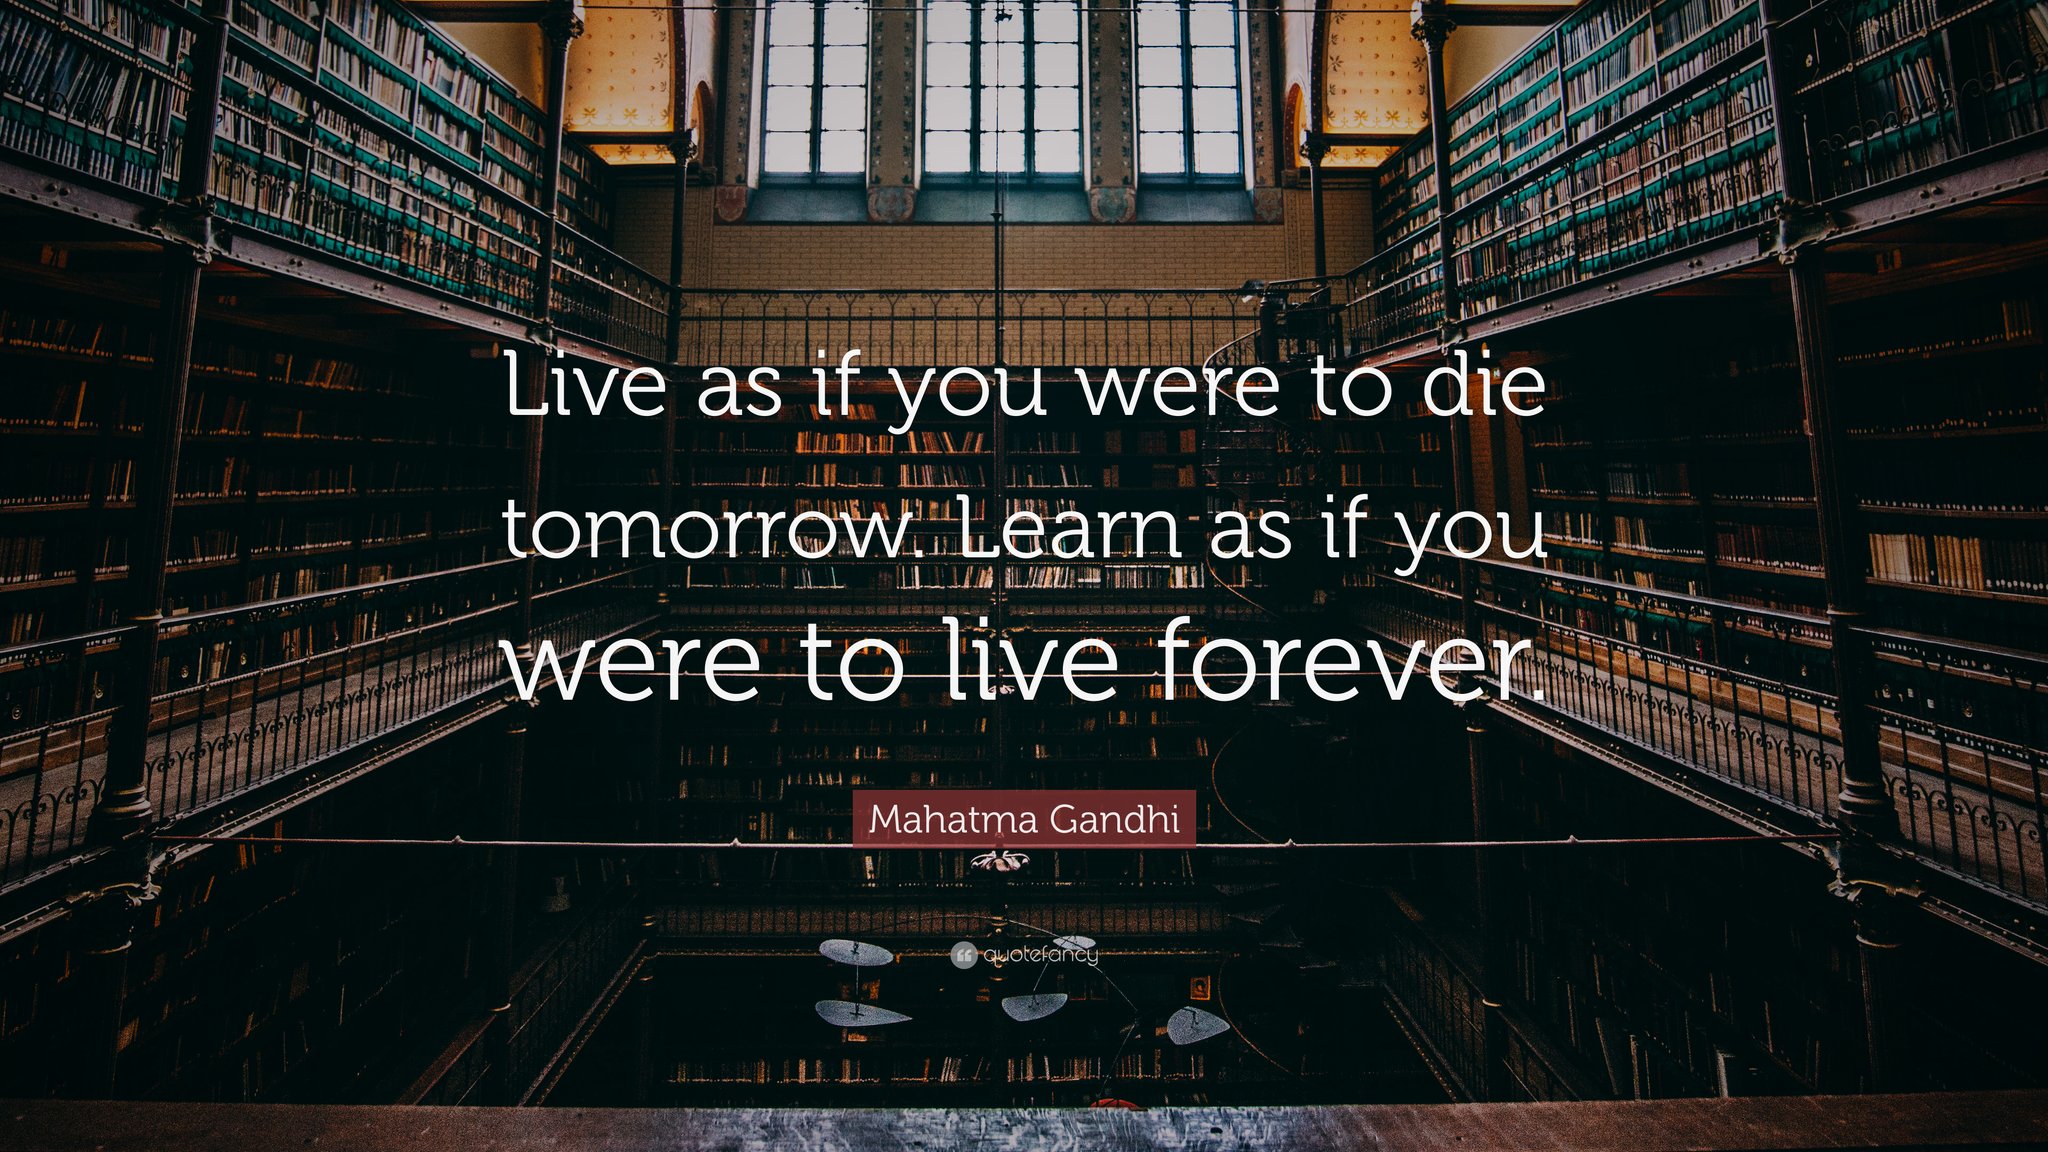 Quotes Inspiration Live As If You Were To Die Tomorrow Learn As If You Were To Live Forever Mahatma Gandhi Quote Quotes Thoughtoftheday Lifequotes Motivation Inspiration Mondaymotivation T Co Mf7o27y5ur